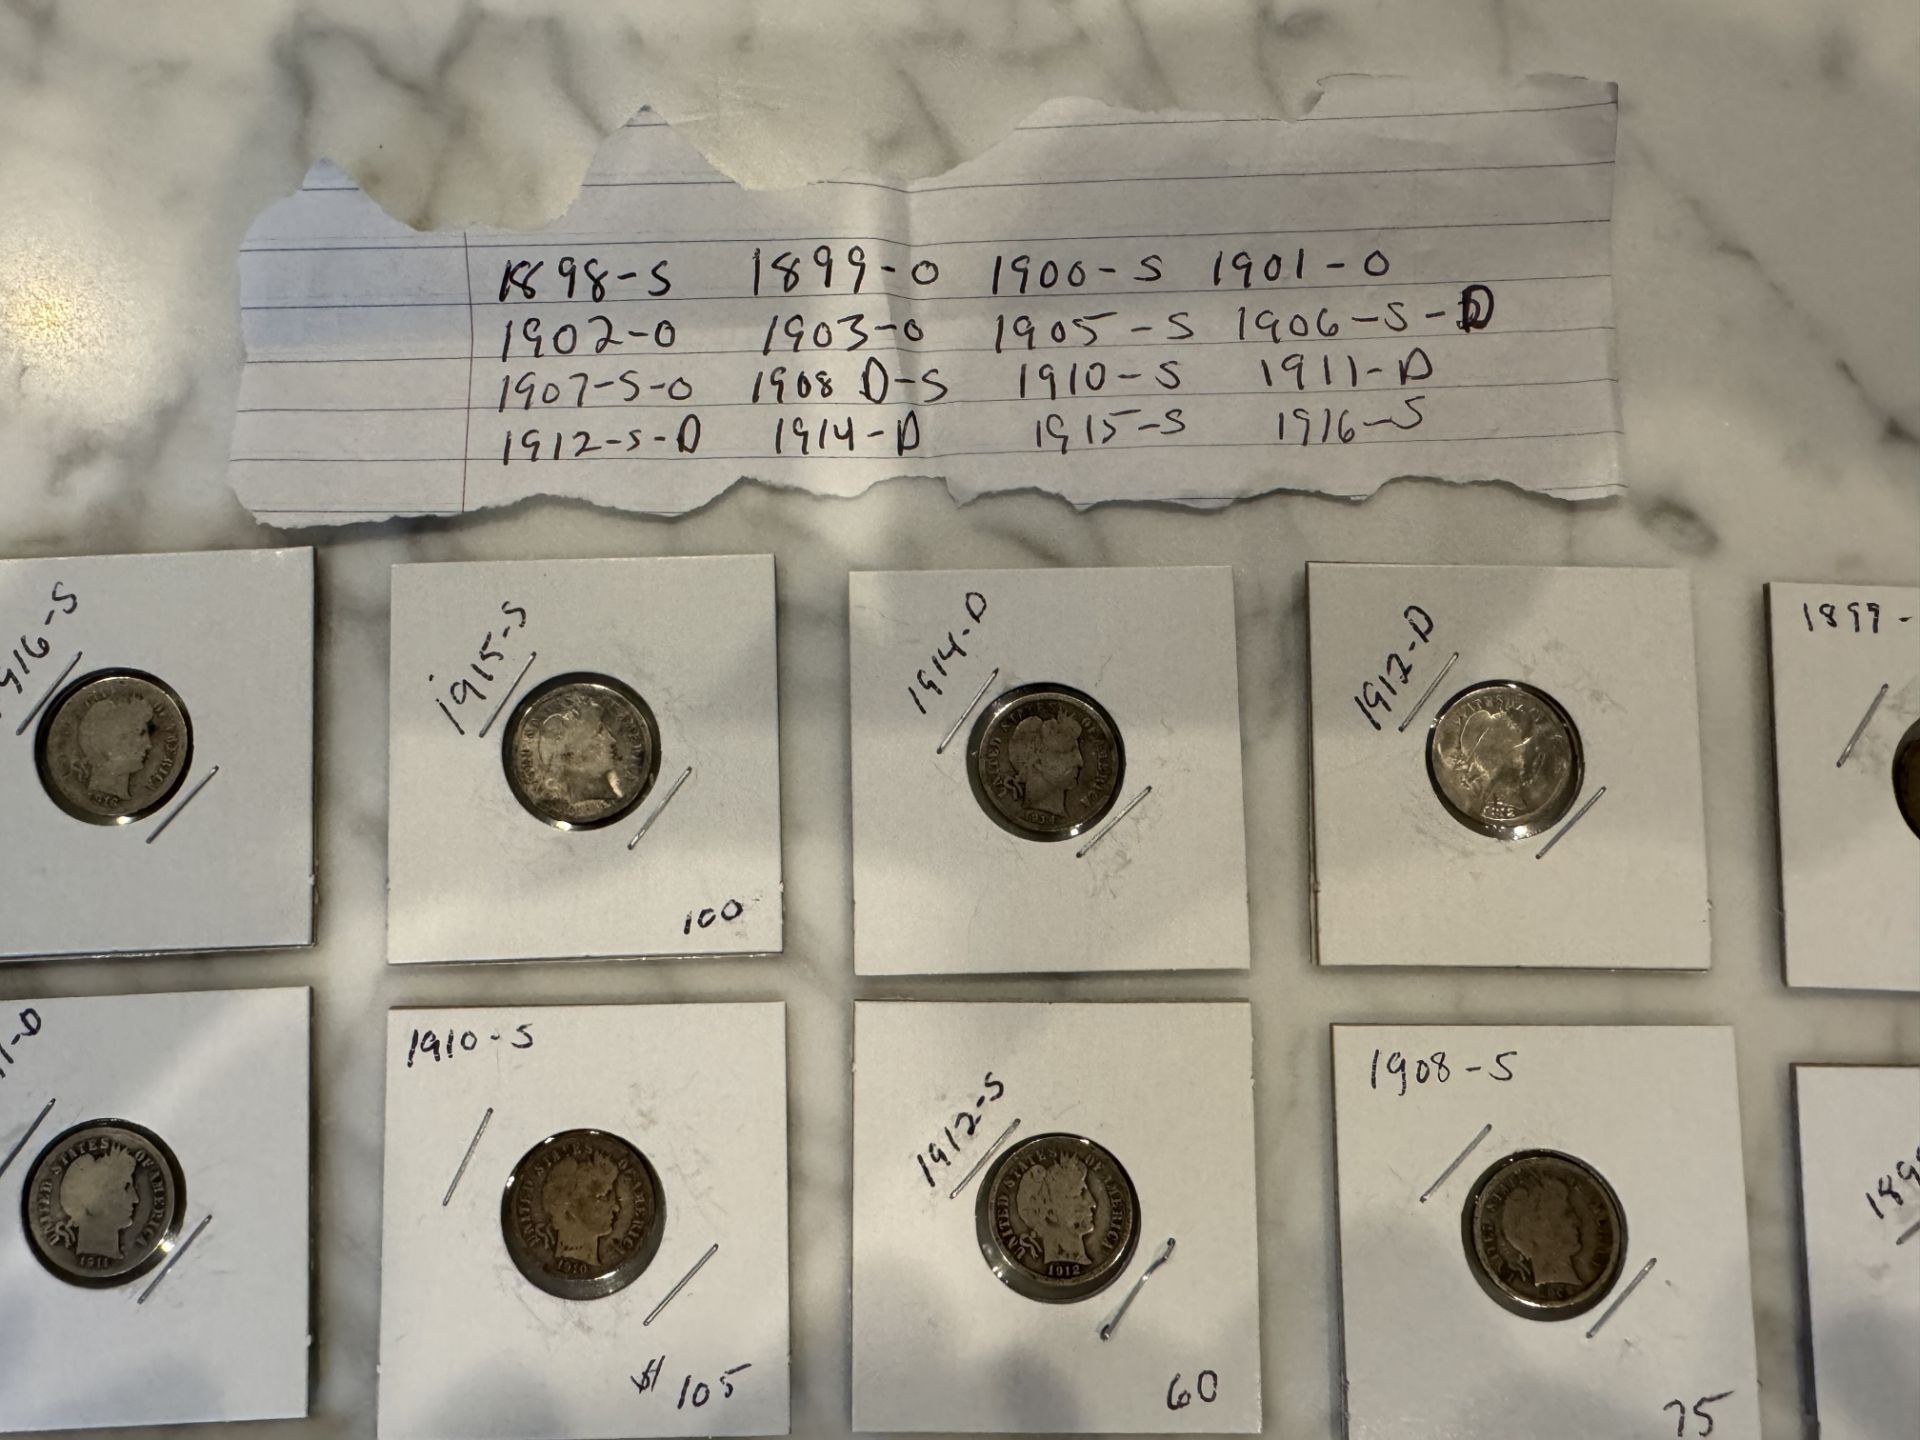 US SILVER BARBER DIMES "LIST IN PHOTOS" - Image 2 of 3